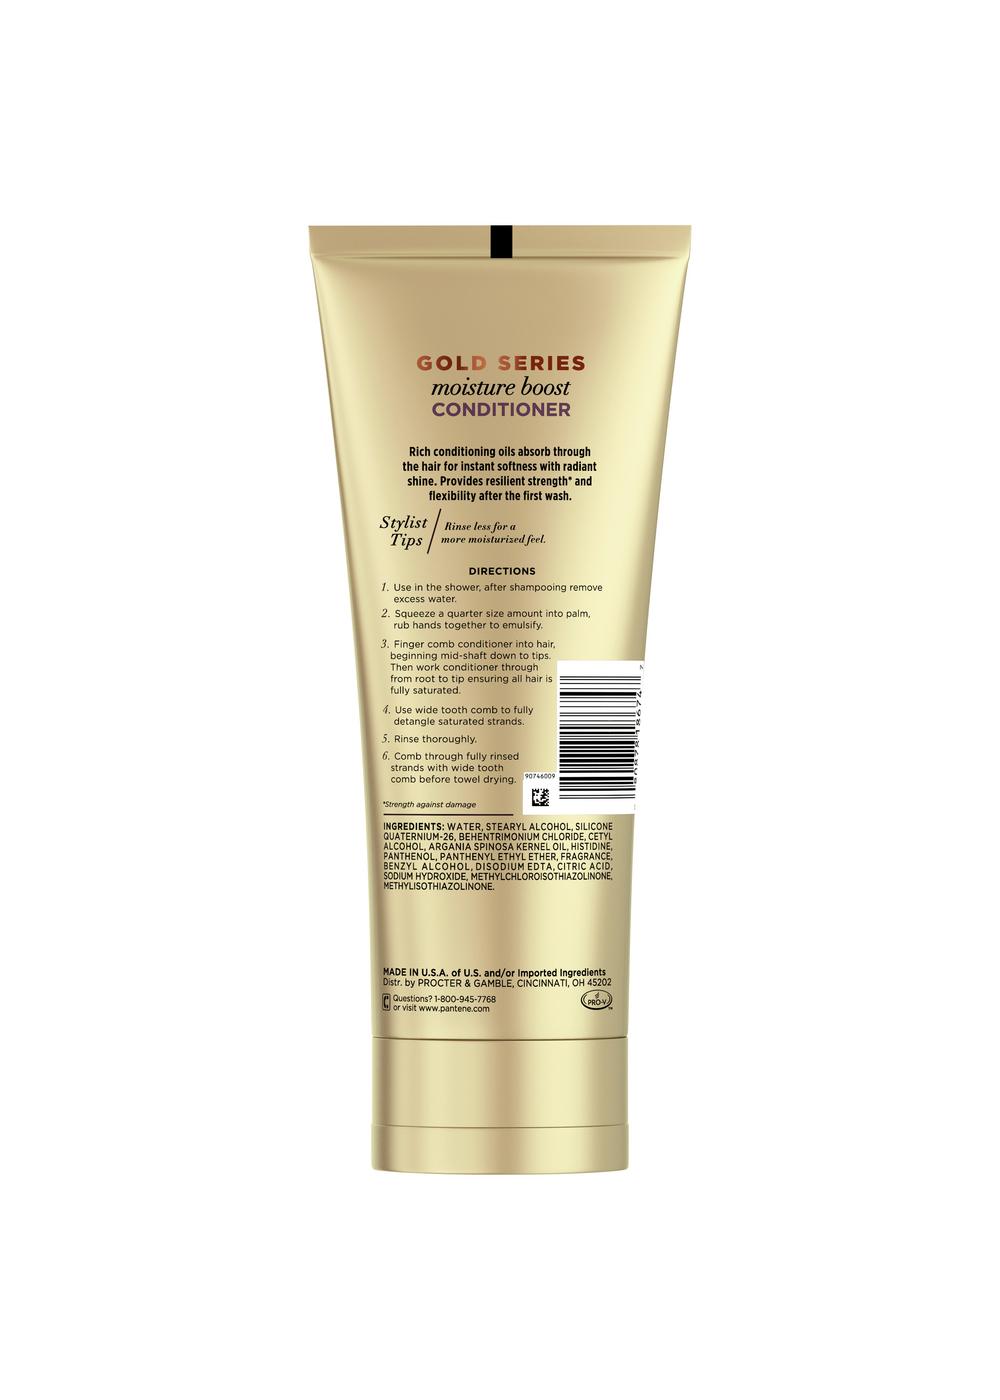 Pantene Gold Series Moisture Boost Conditioner; image 3 of 3